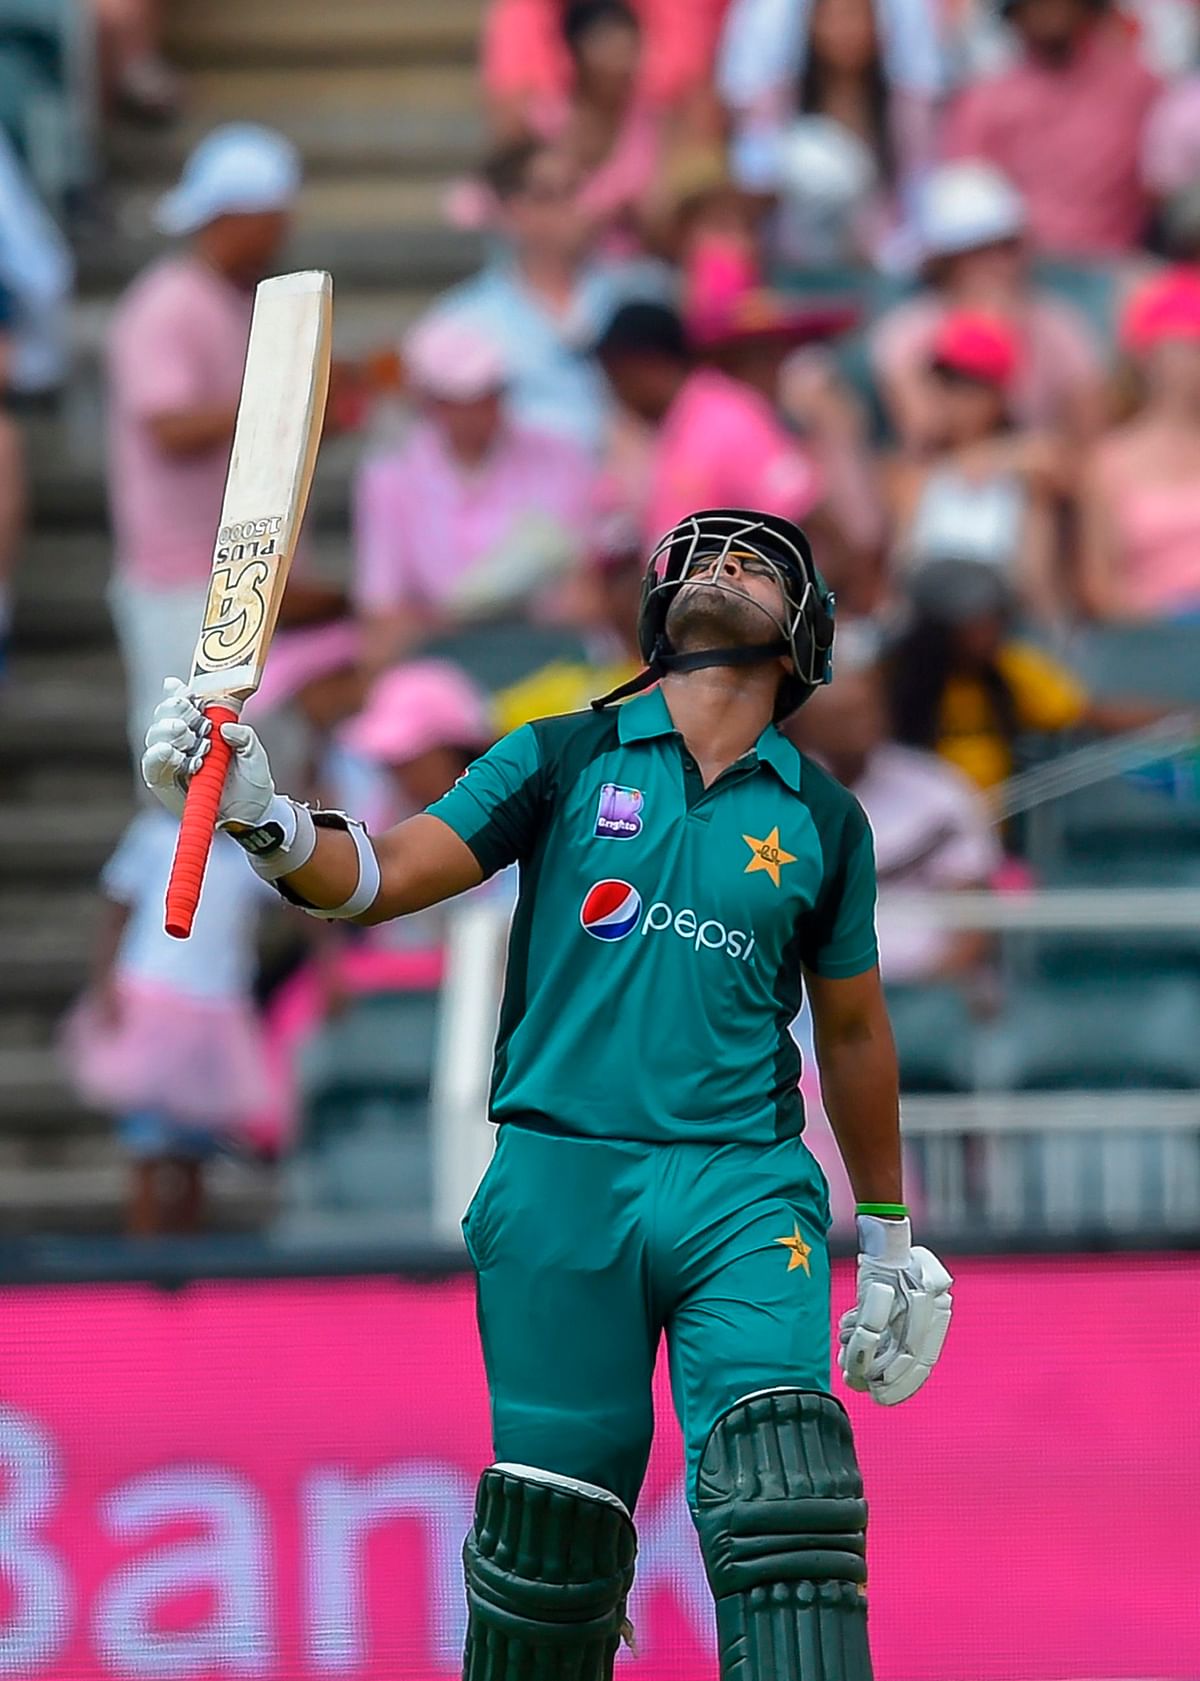 Pakistan`s Imam-ul-Haq celebrates scoring a half-century (50 runs) during the 4th one-day international (ODI) cricket match between South Africa and Pakistan at the Wanderers Cricket Stadium in Johannesburg on 27 January 2019. -- AFP